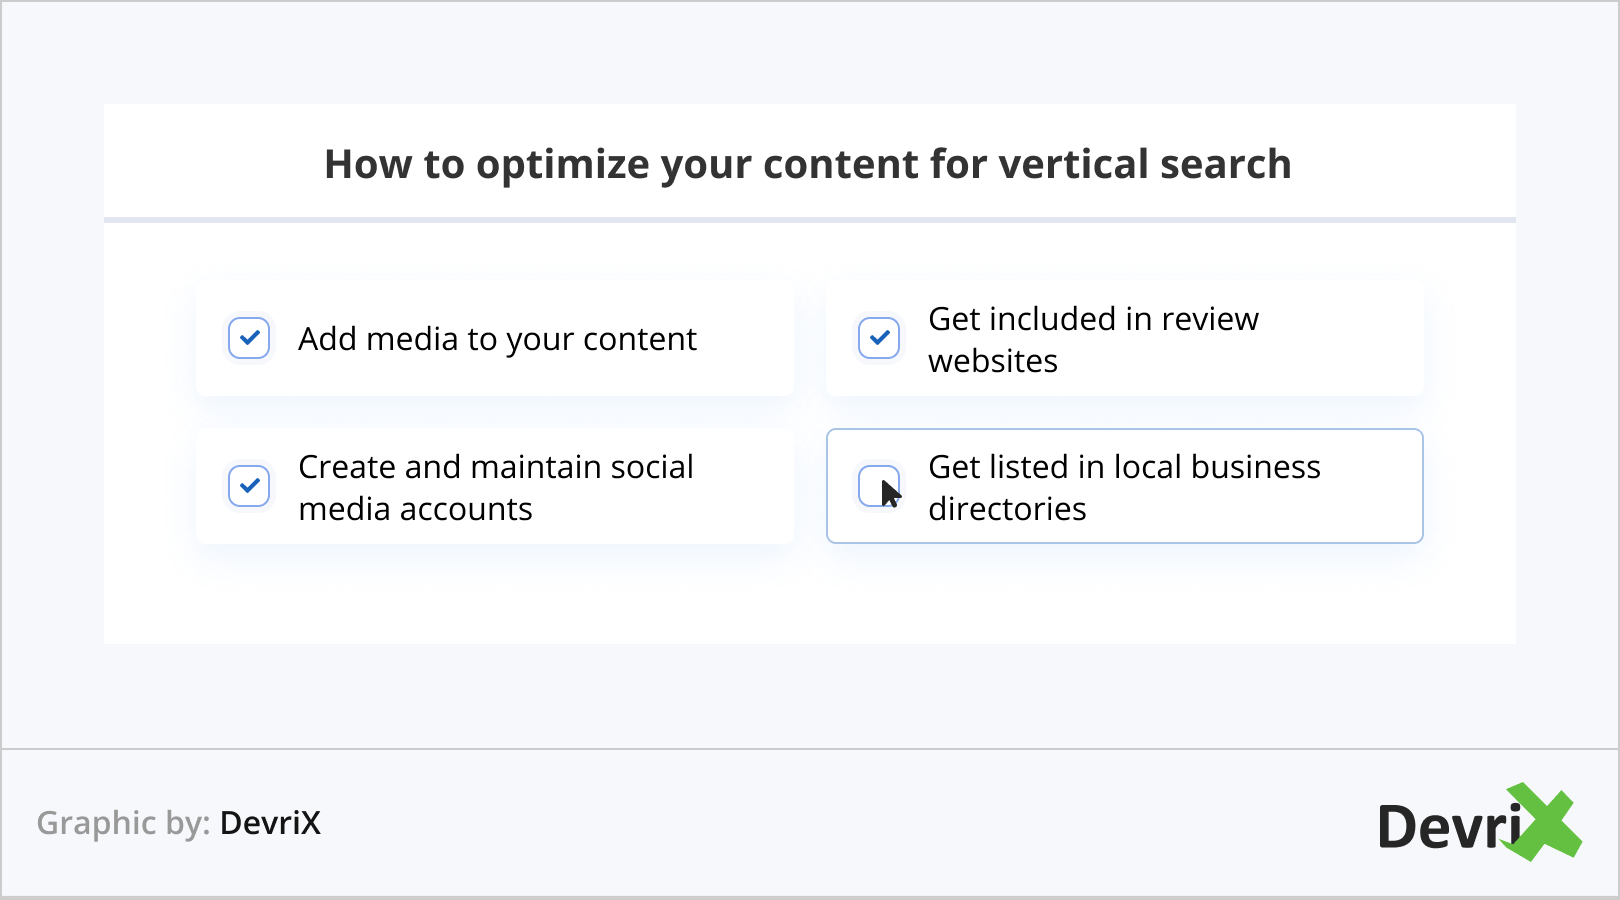 How to Optimize Your Content for Vertical Search